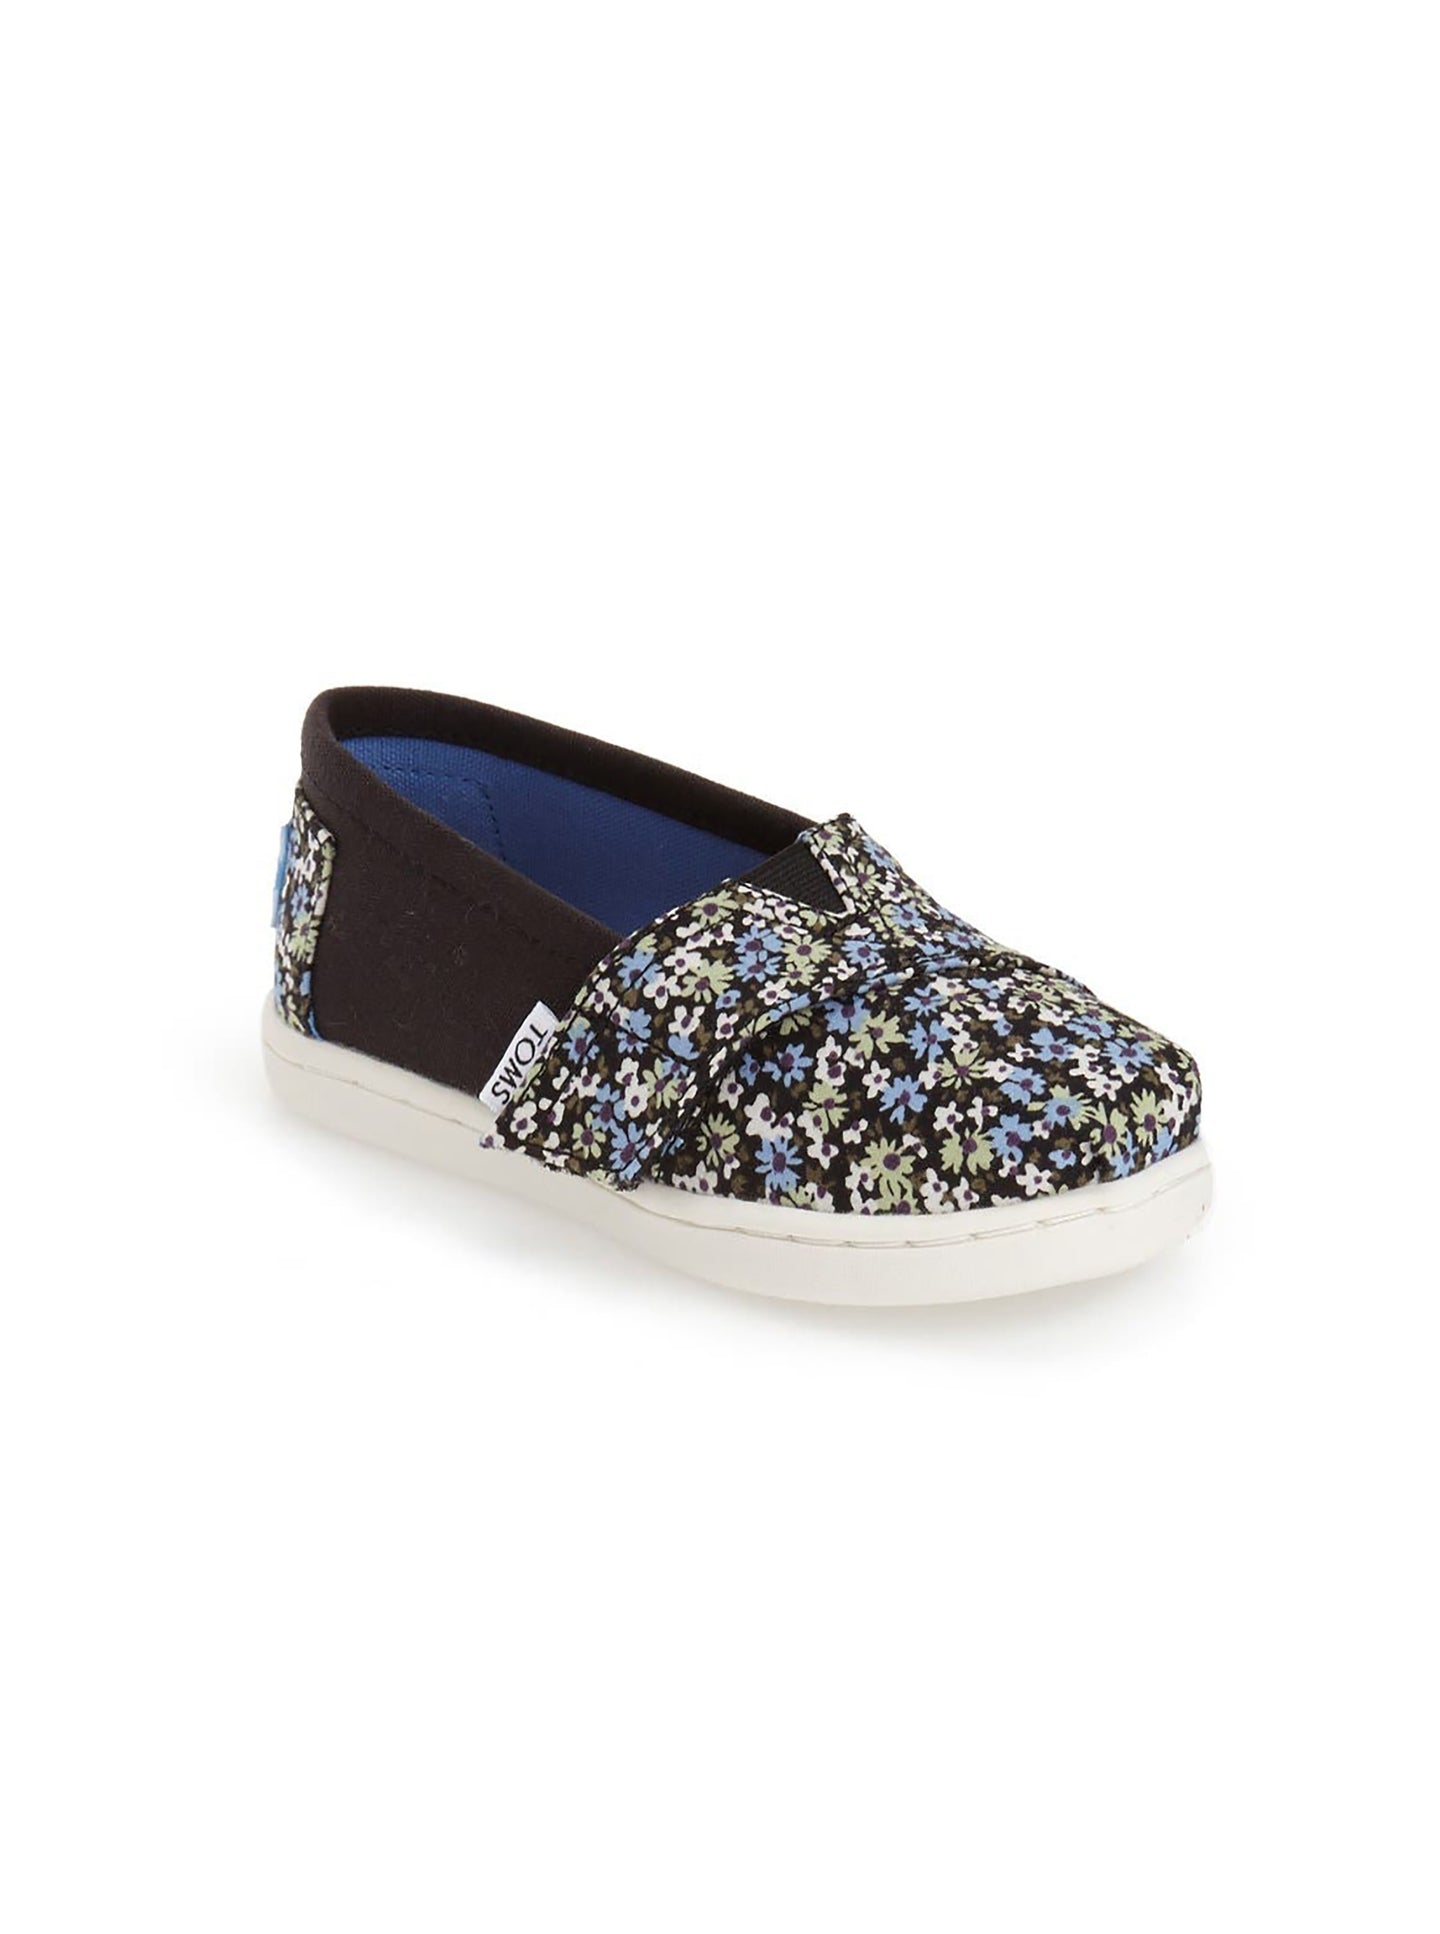 [US4] TOMS Classic Black Canvas Daisy Floral BNWT - in box